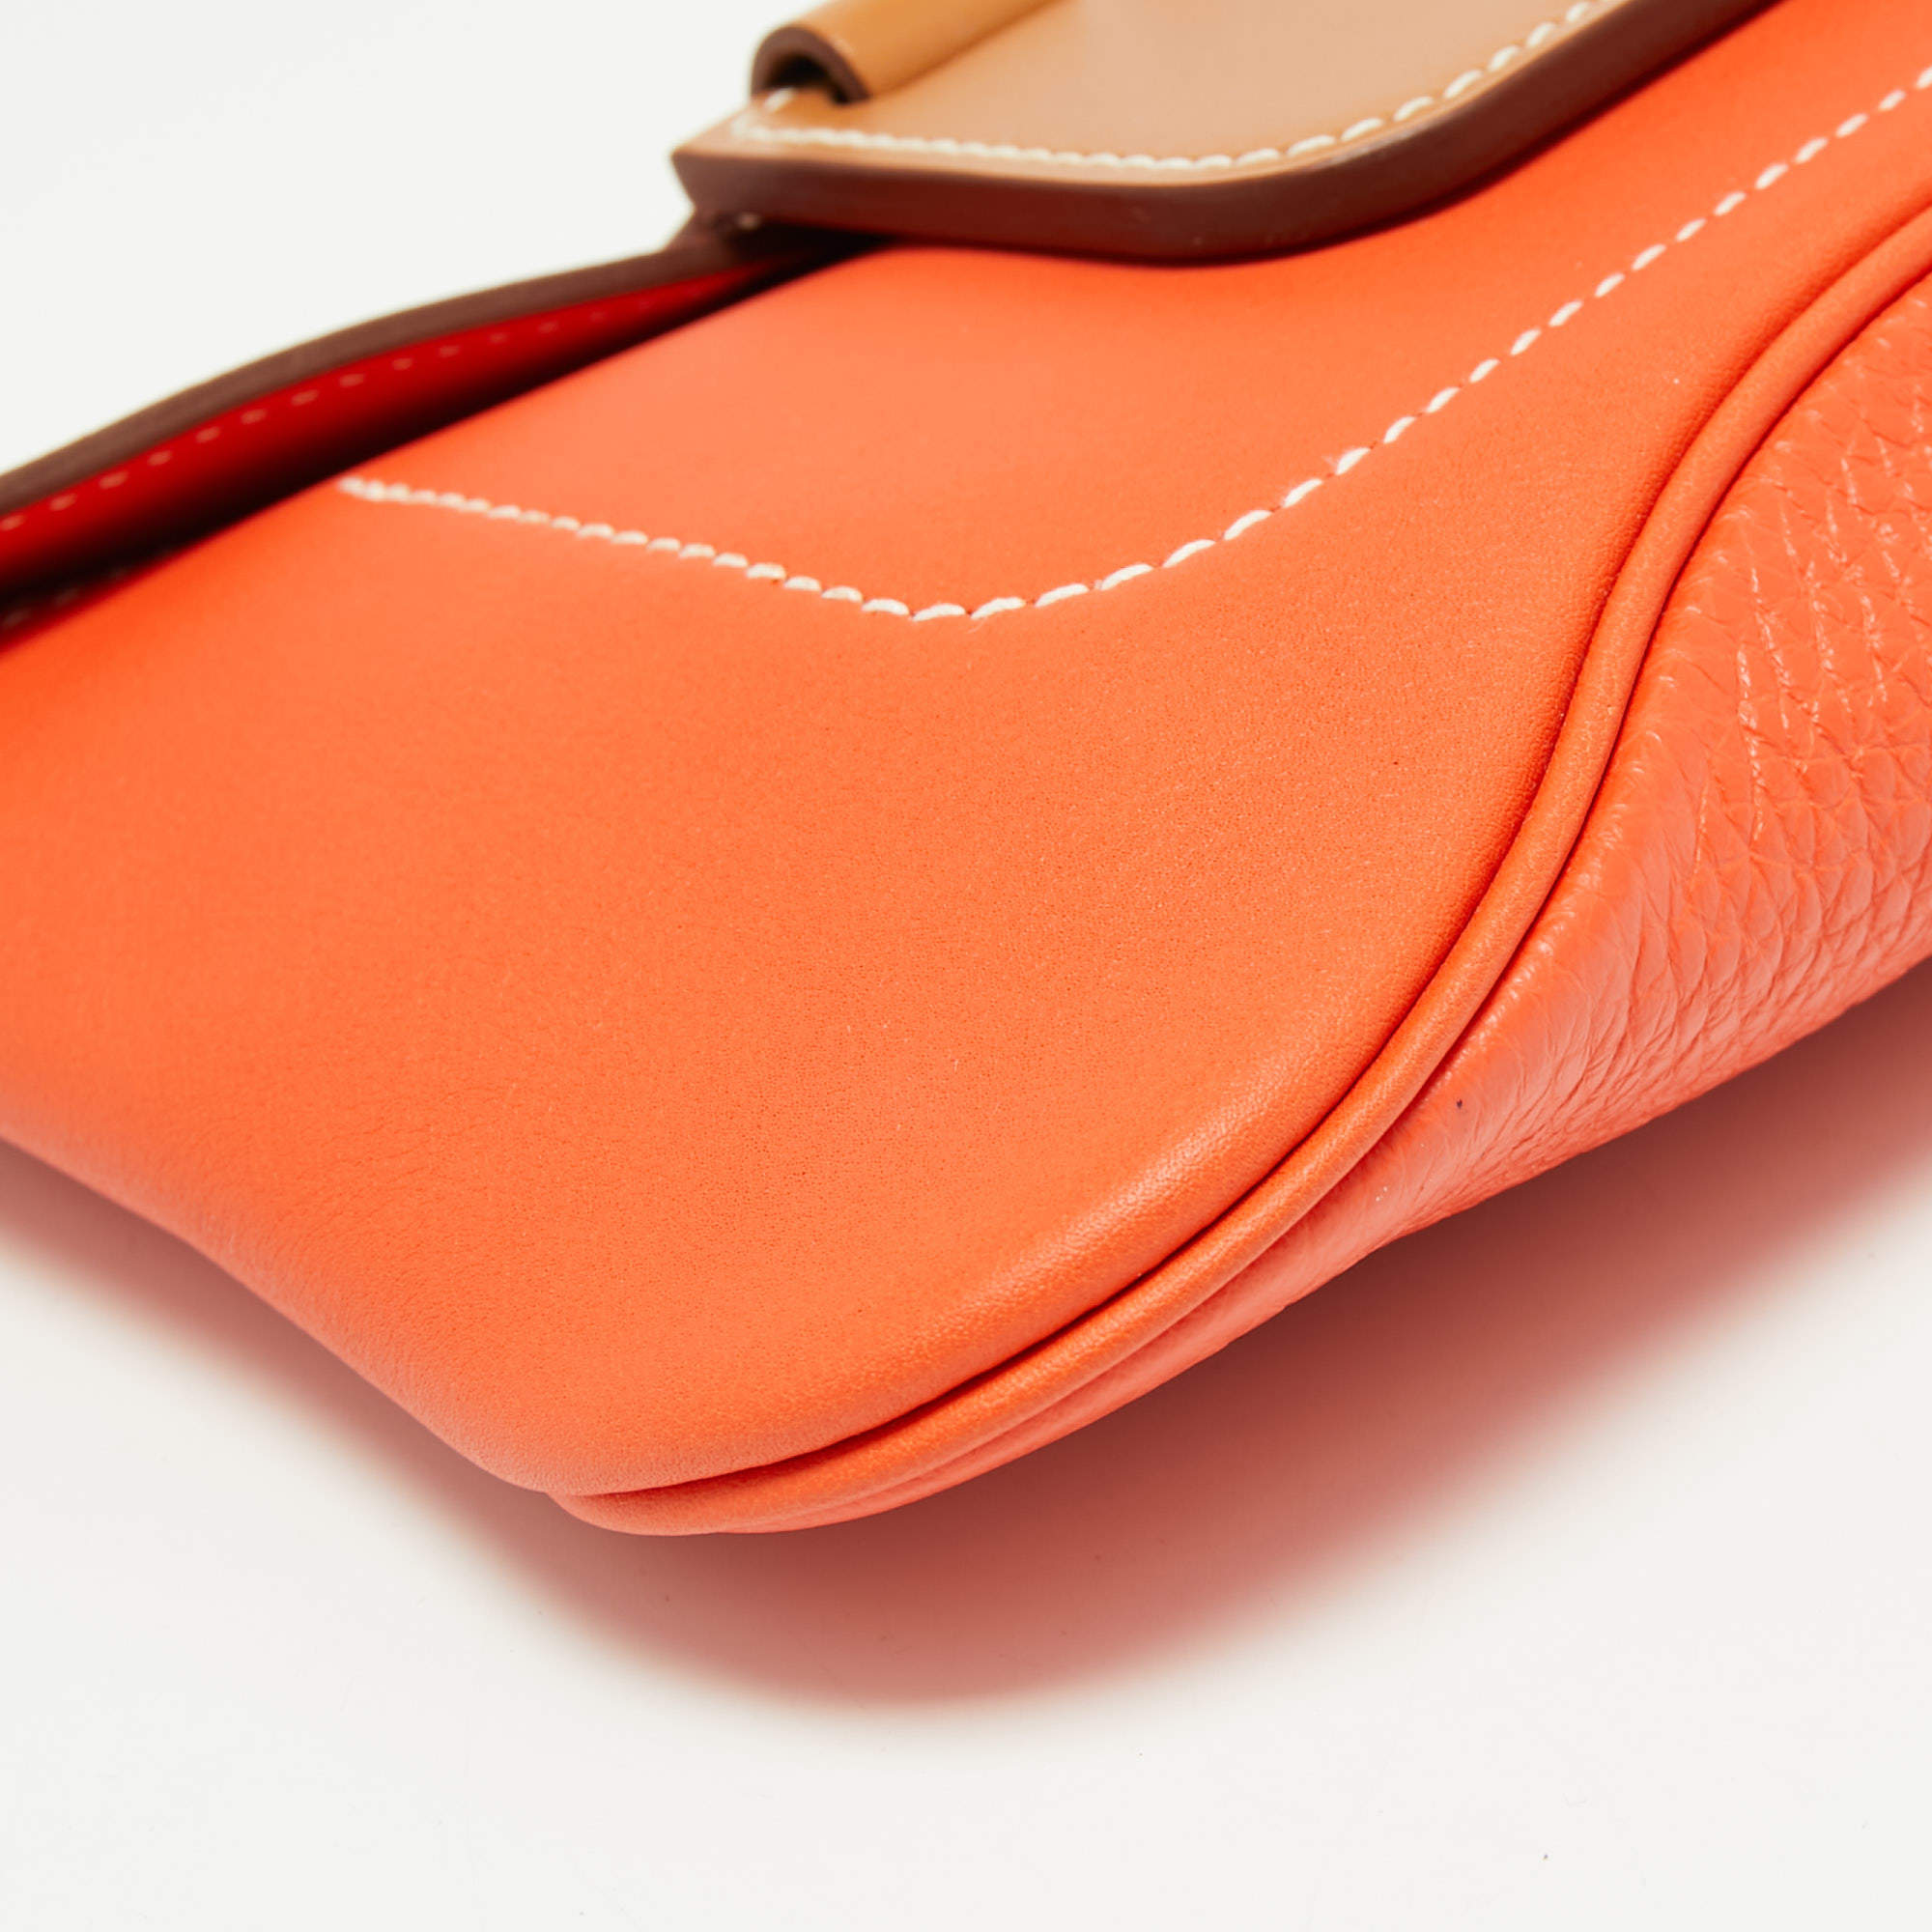 Hermes Orange Poppy Clemence and Swift Leather Virevolte Clutch